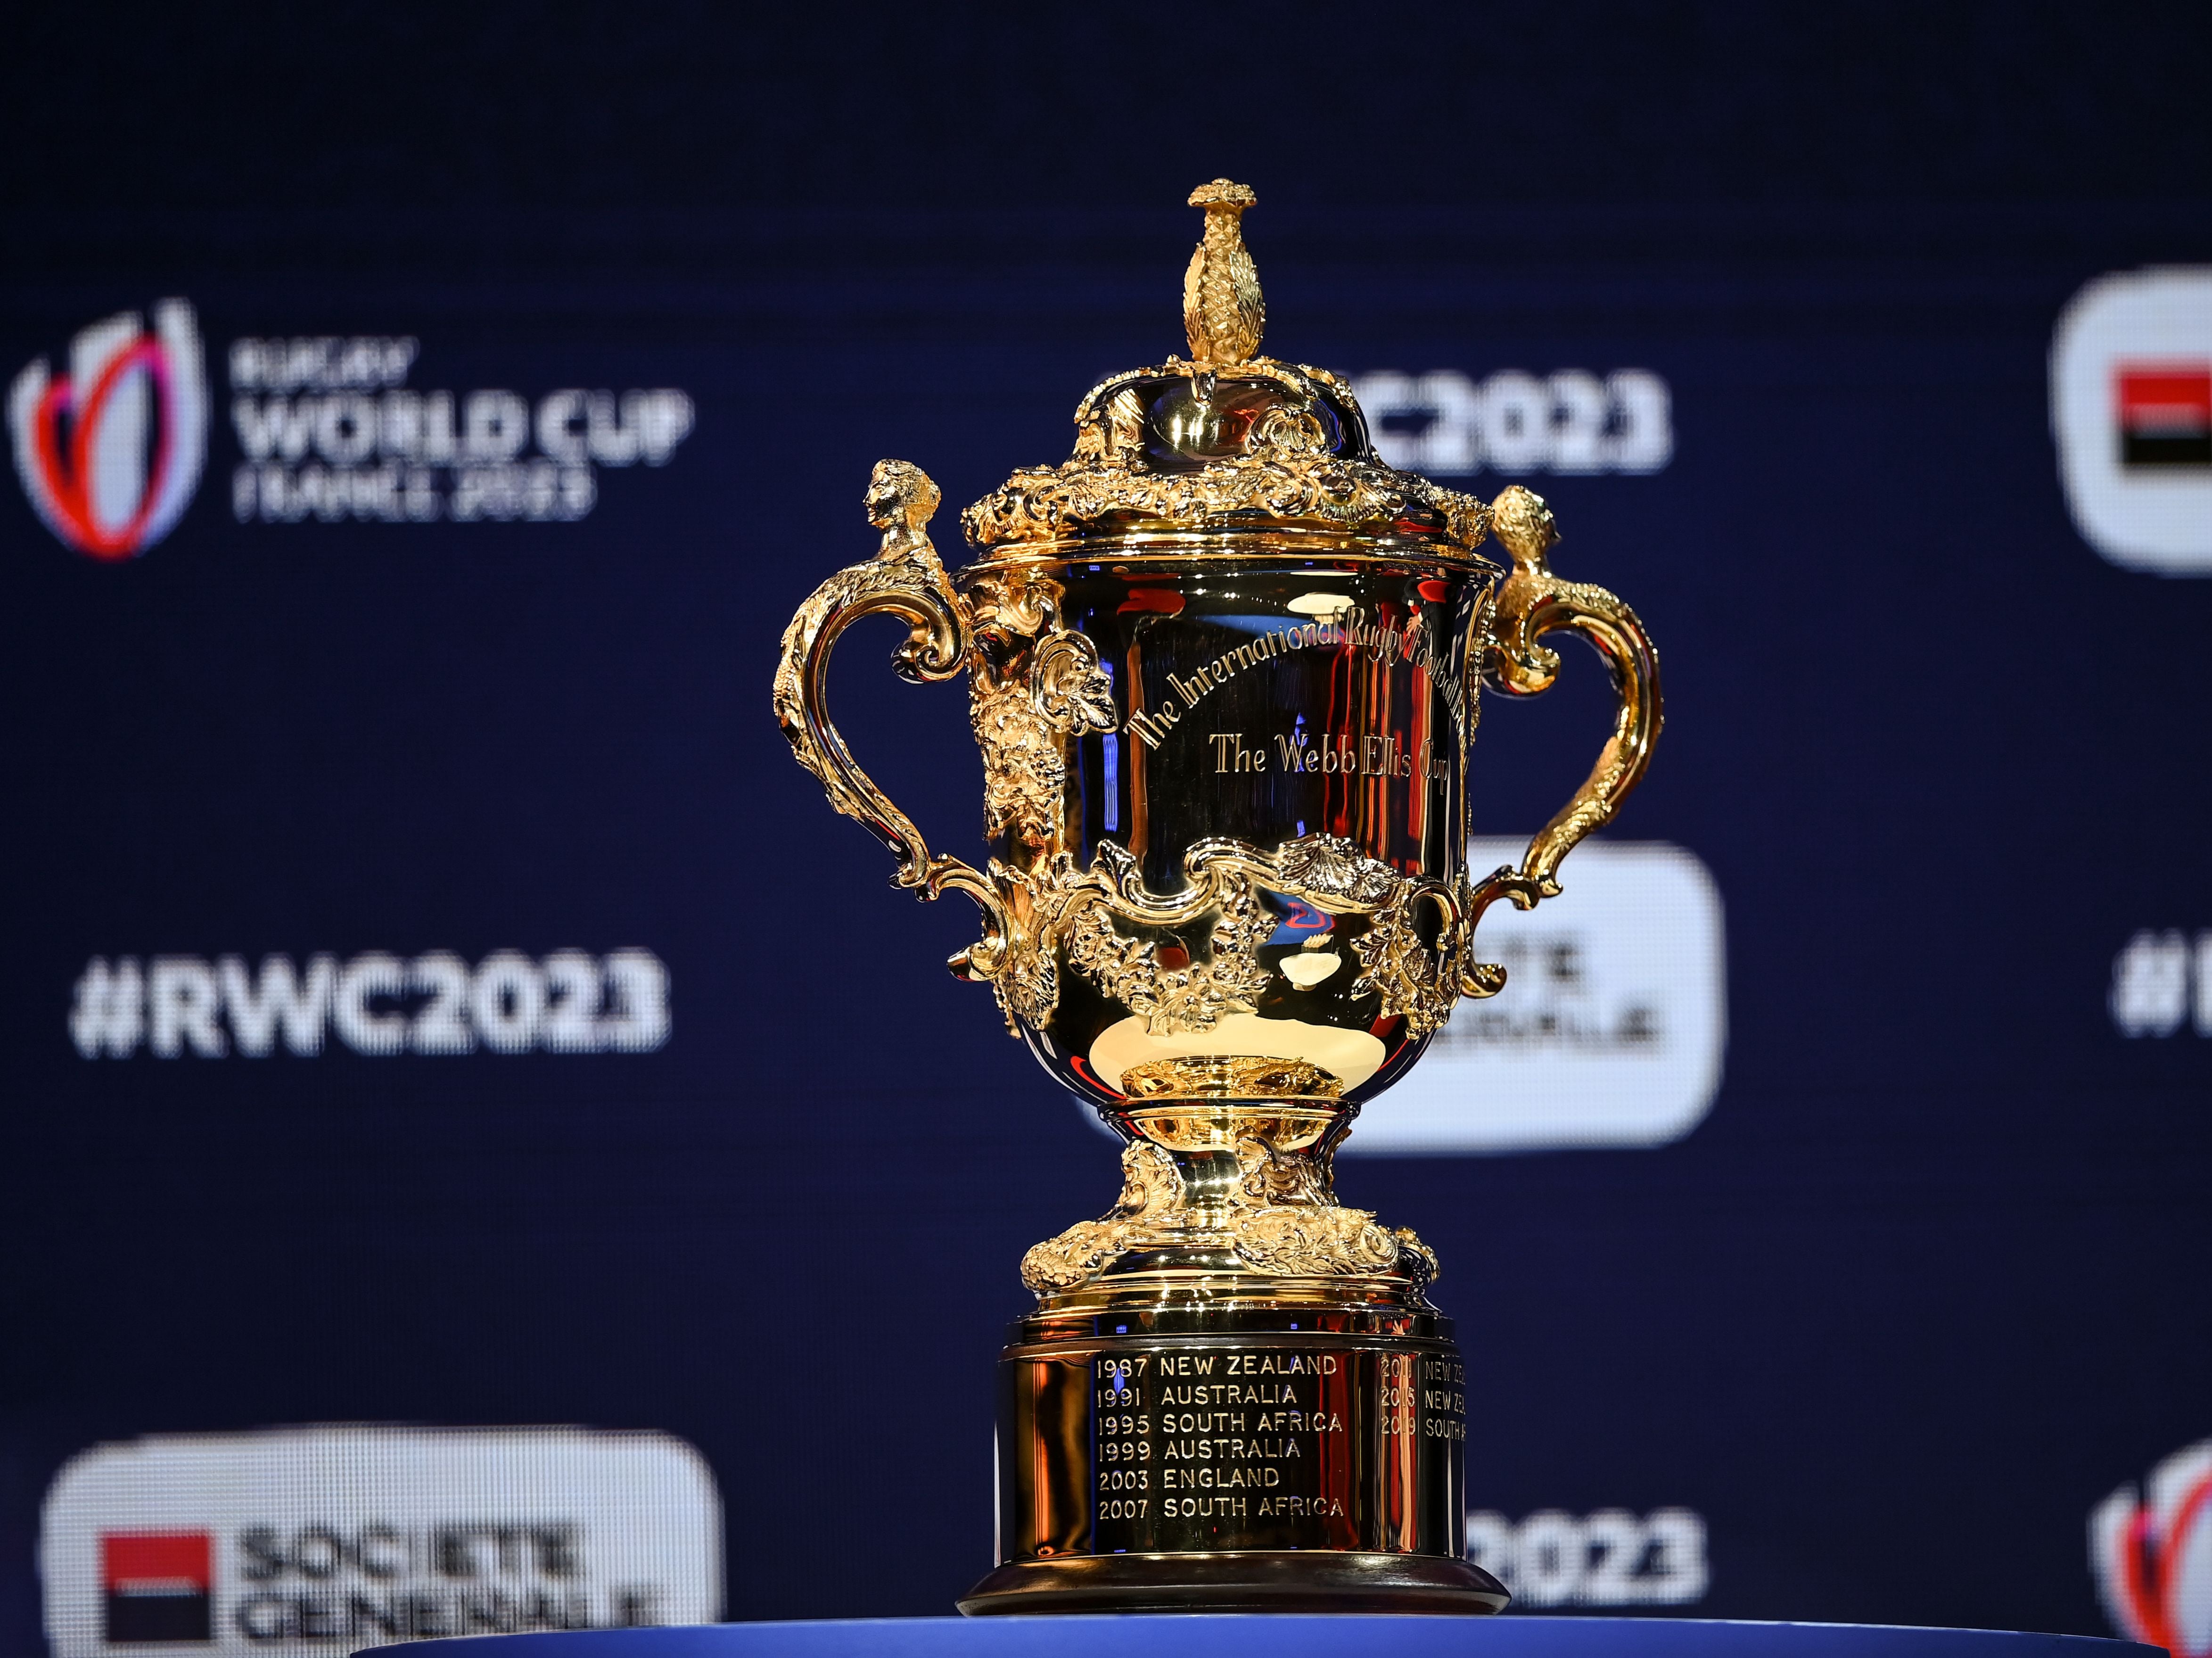 20 teams will compete at the 2023 Rugby World Cup